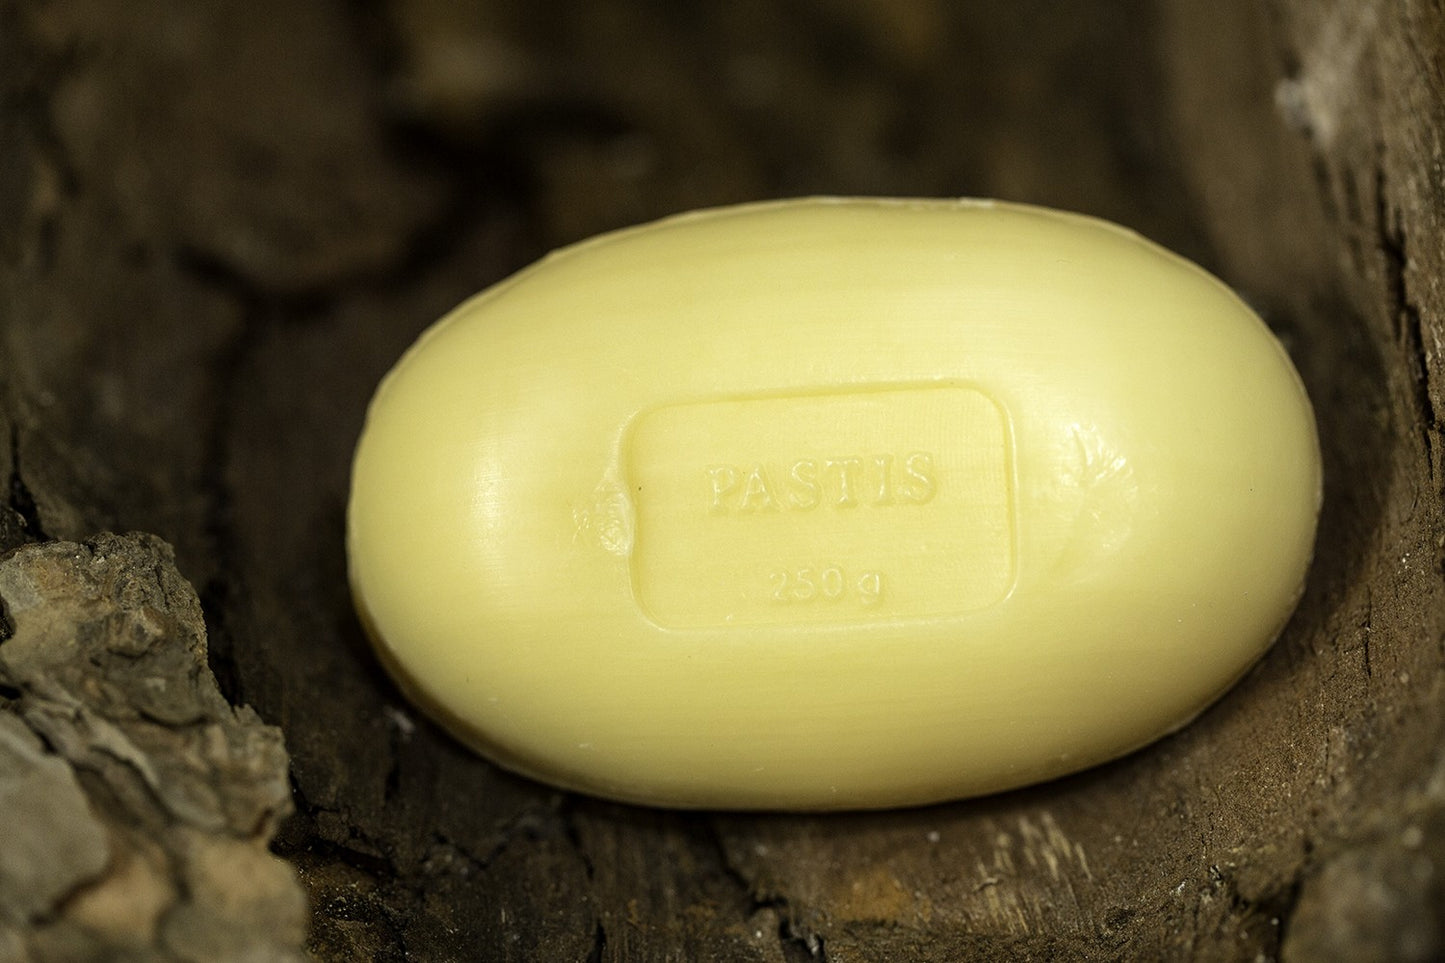 Soap Oval 250g Pastis